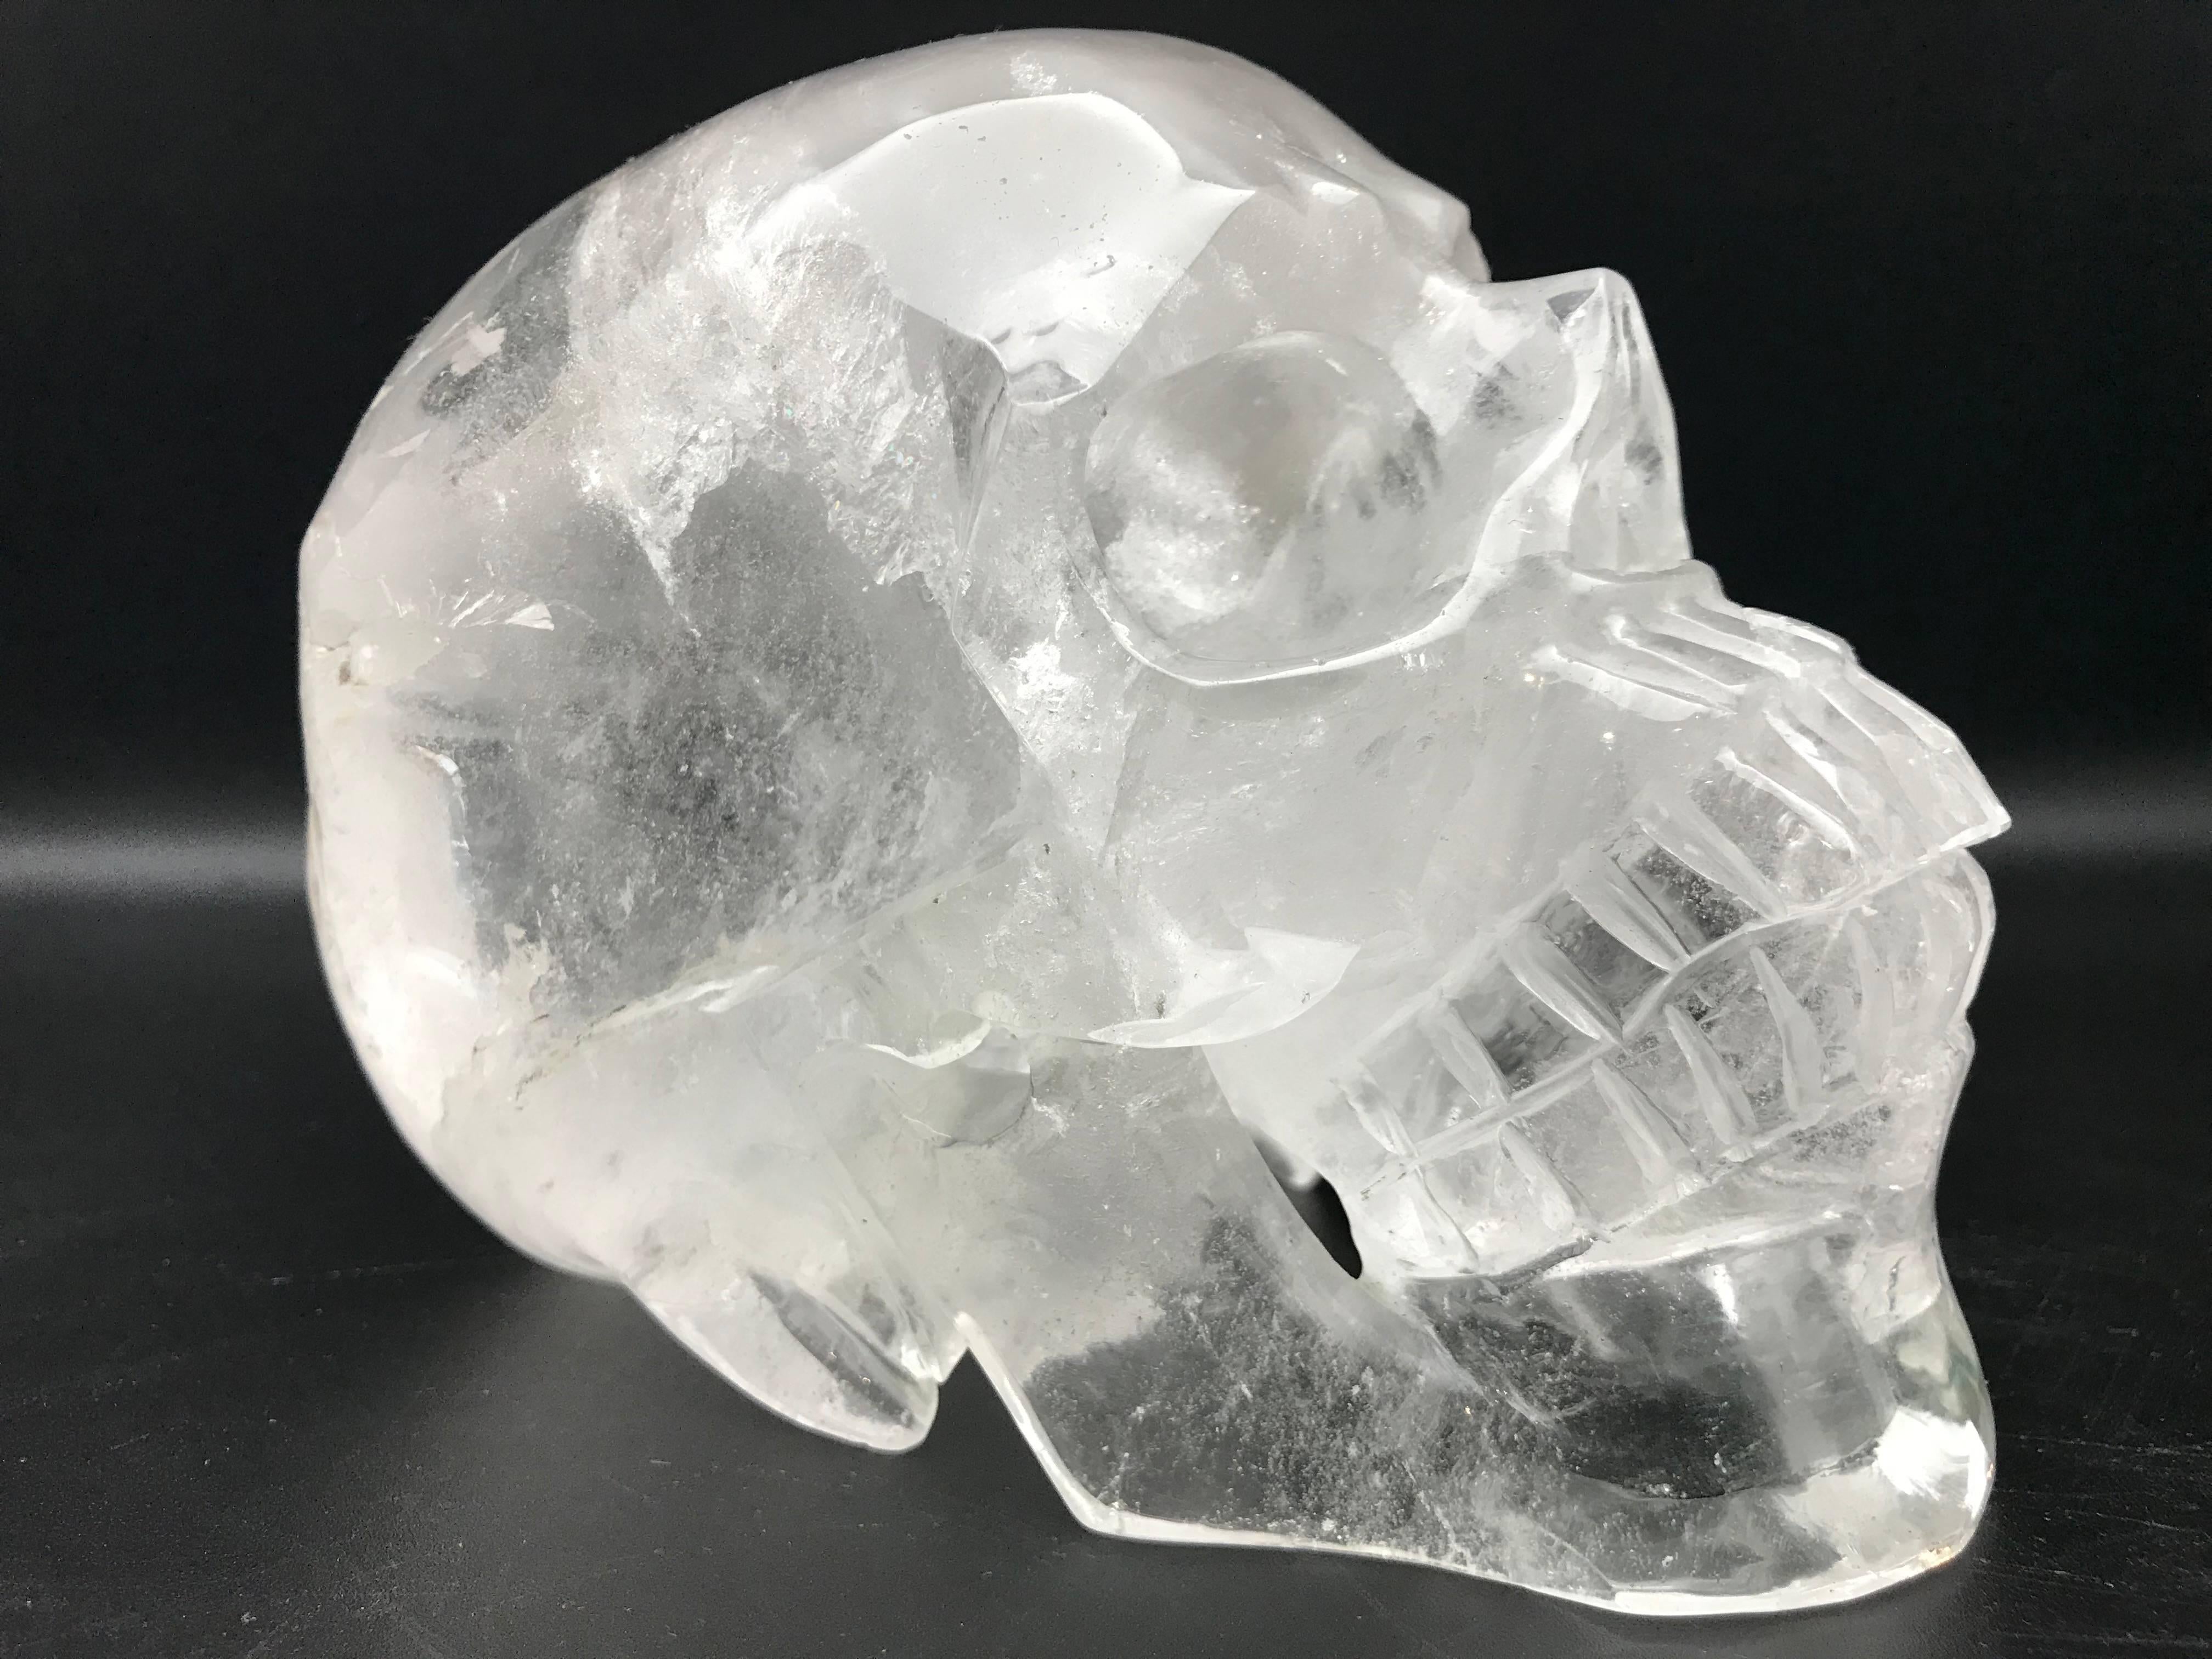 This very large rock crystal skull was hand-carved in Brazil. Rock crystal, a form of quartz, has been used in jewelry and ornaments since antiquity, and is the purest possible form of quartz.